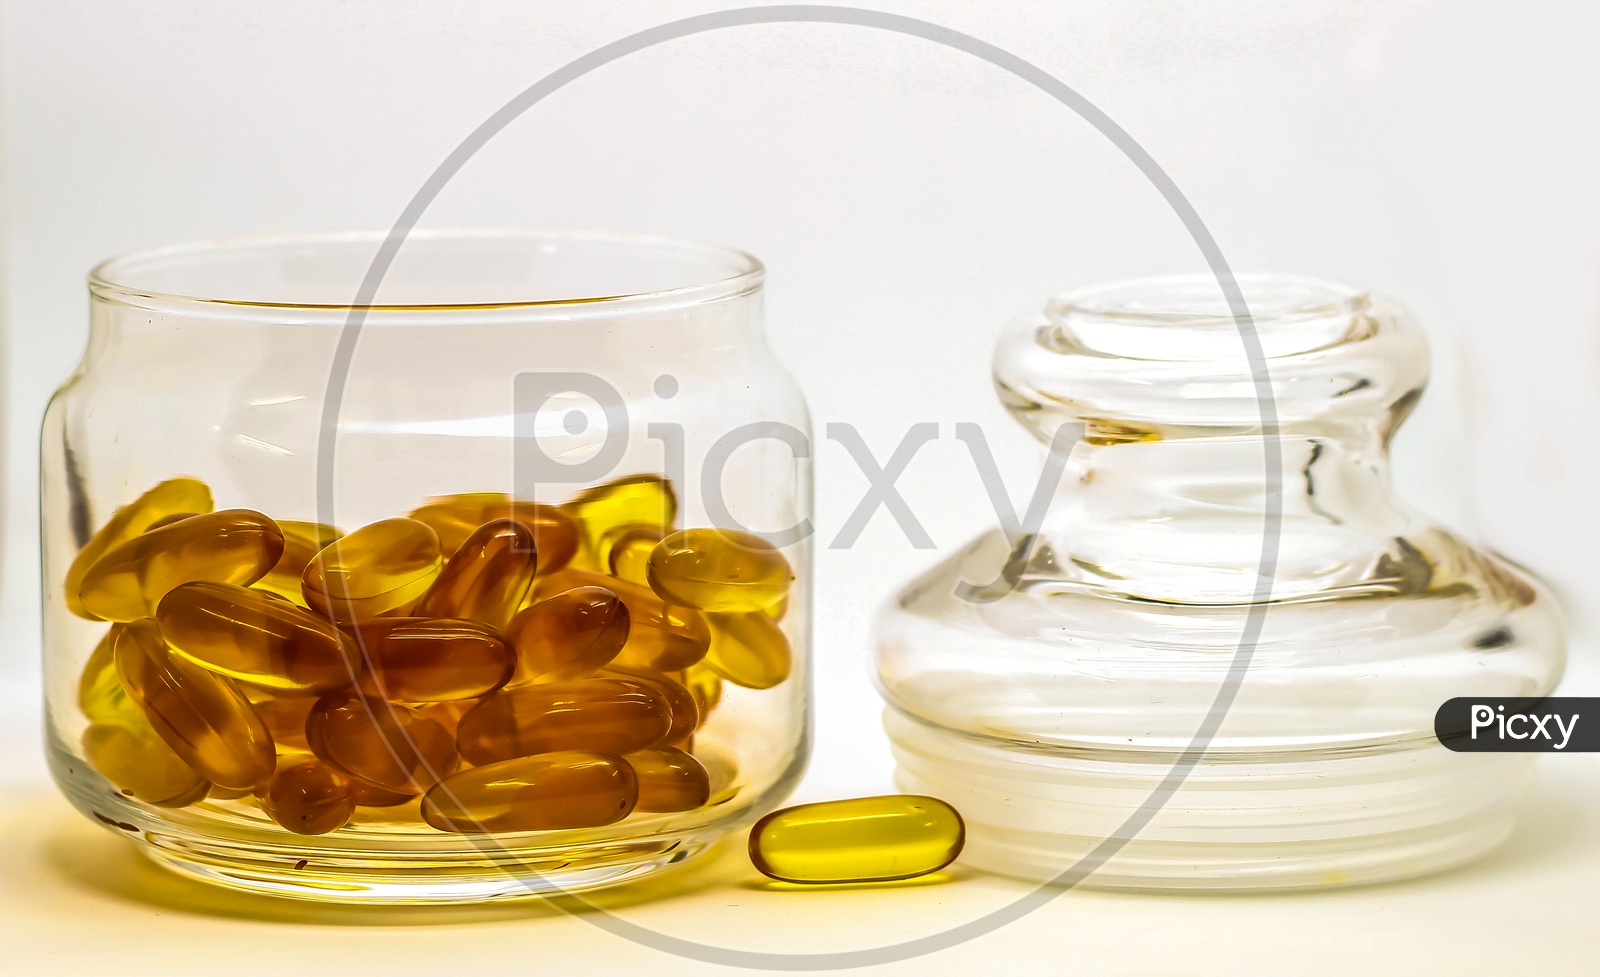 Cod Liver Oil Omega 3 Vitamin E Gel Capsules Isolated On White Background In A Transparent Glass Bottle With Glass Lid